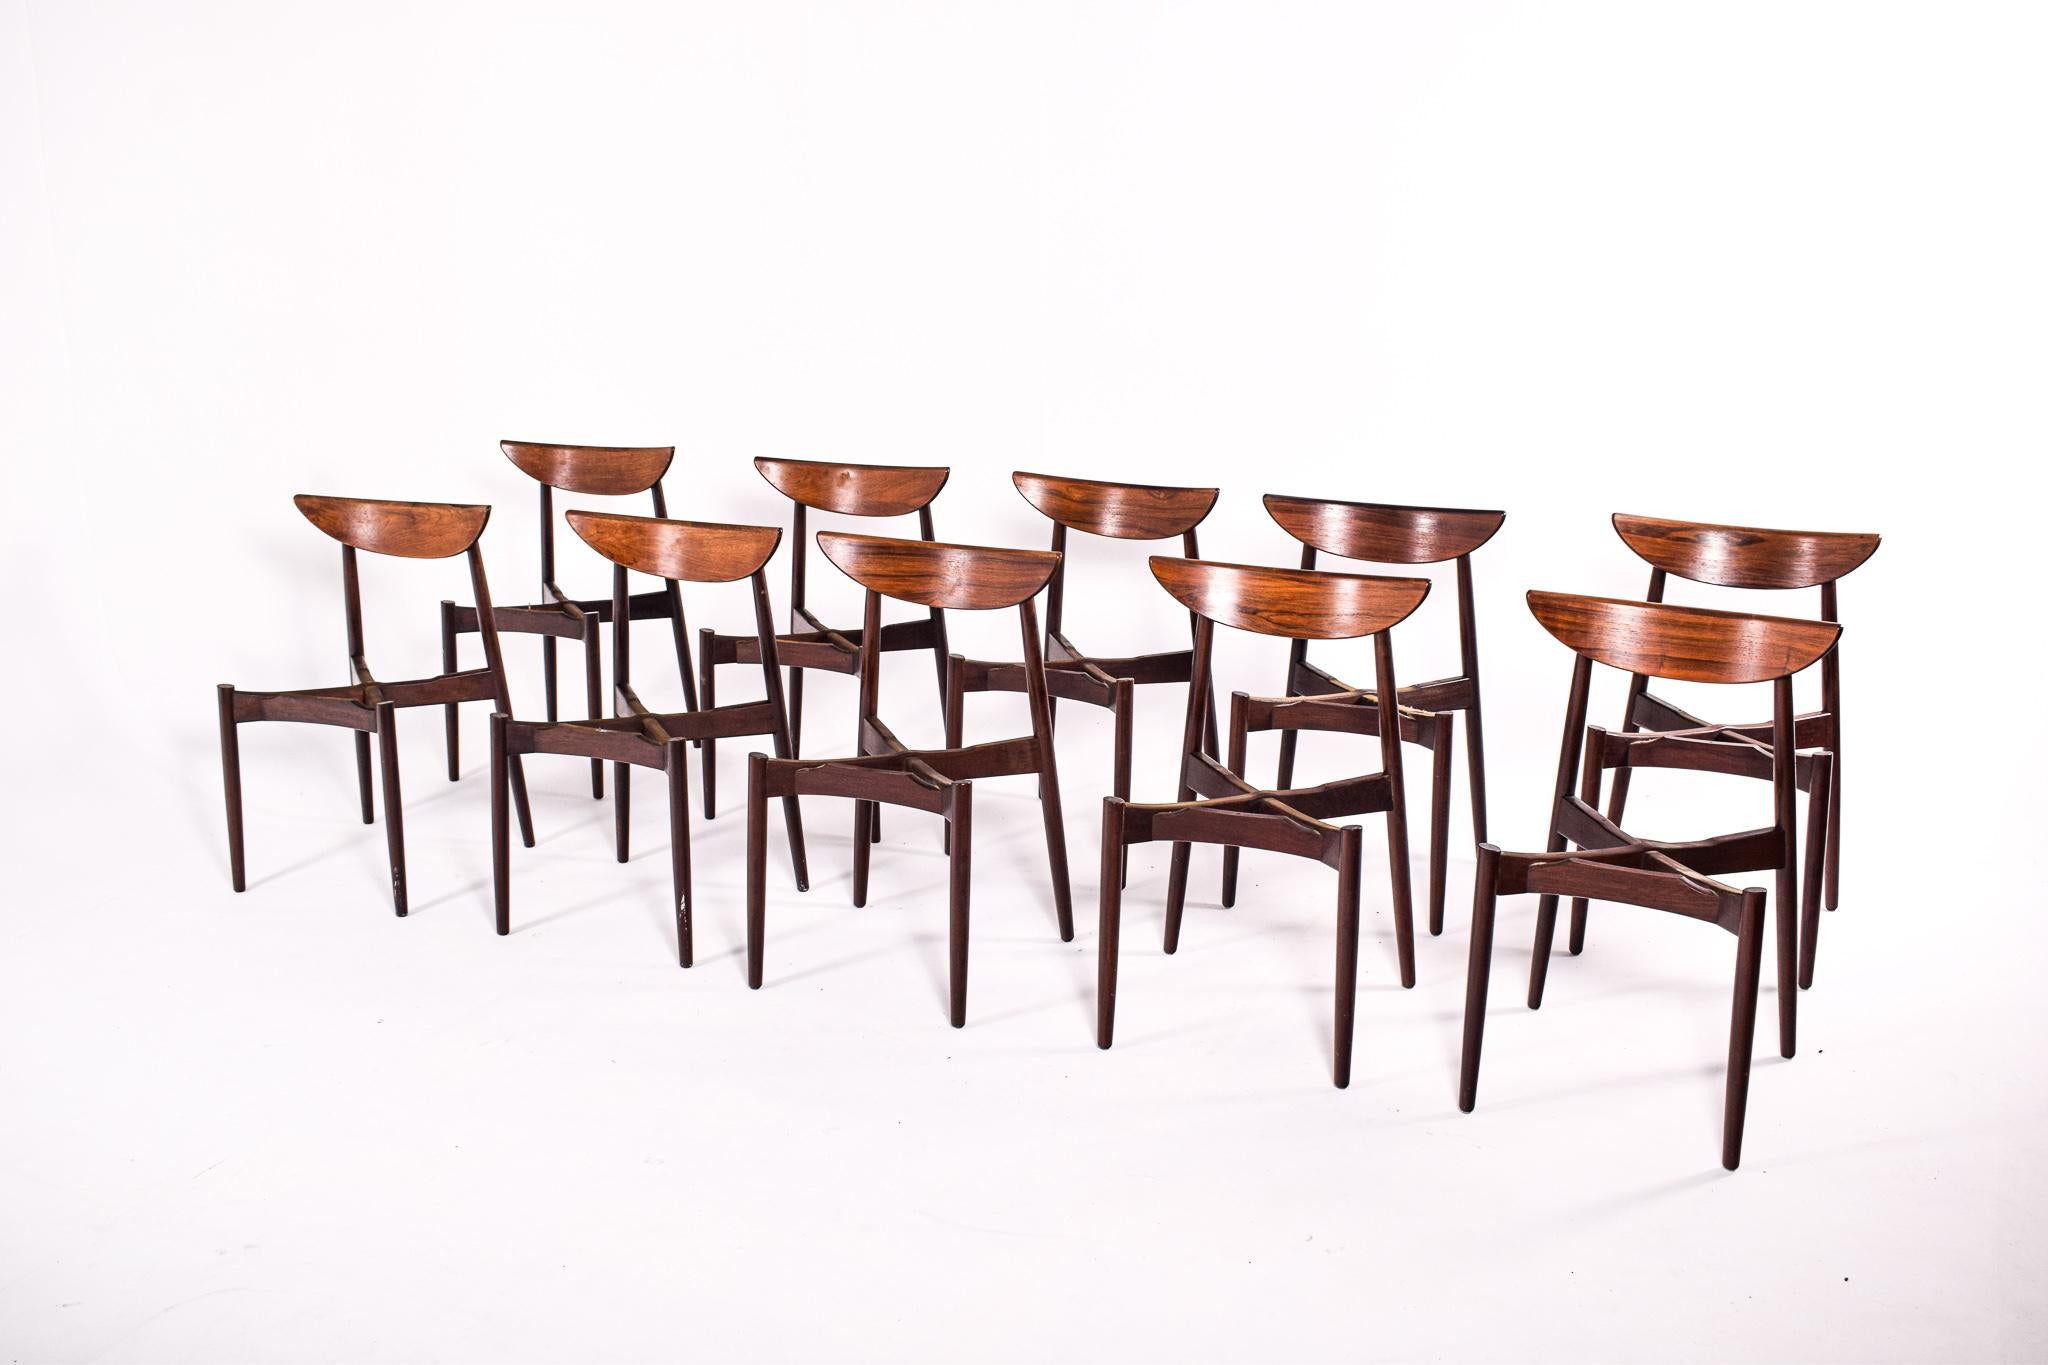 Stunning, solid rosewood set of ten dining chairs by one of the Danish great designers. Harry Ostergaard designed these dining chairs in the 1950s. The chairs feature elegant rosewood frames with curved backrests and tapered legs. Reupholstering.